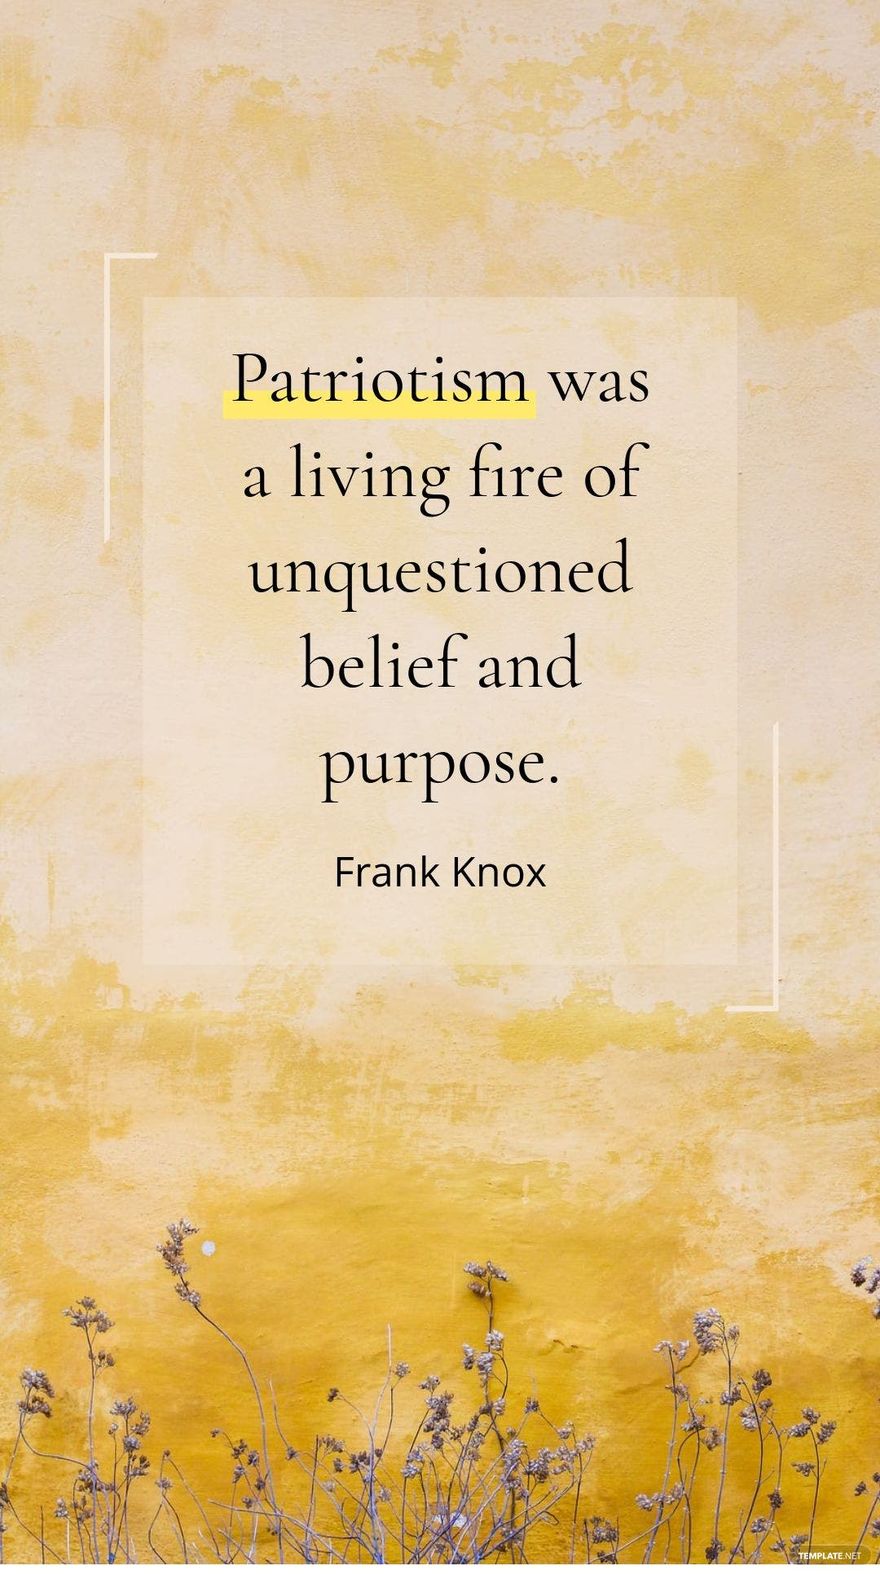 Free Frank Knox - Patriotism was a living fire of unquestioned belief and purpose.  in JPG